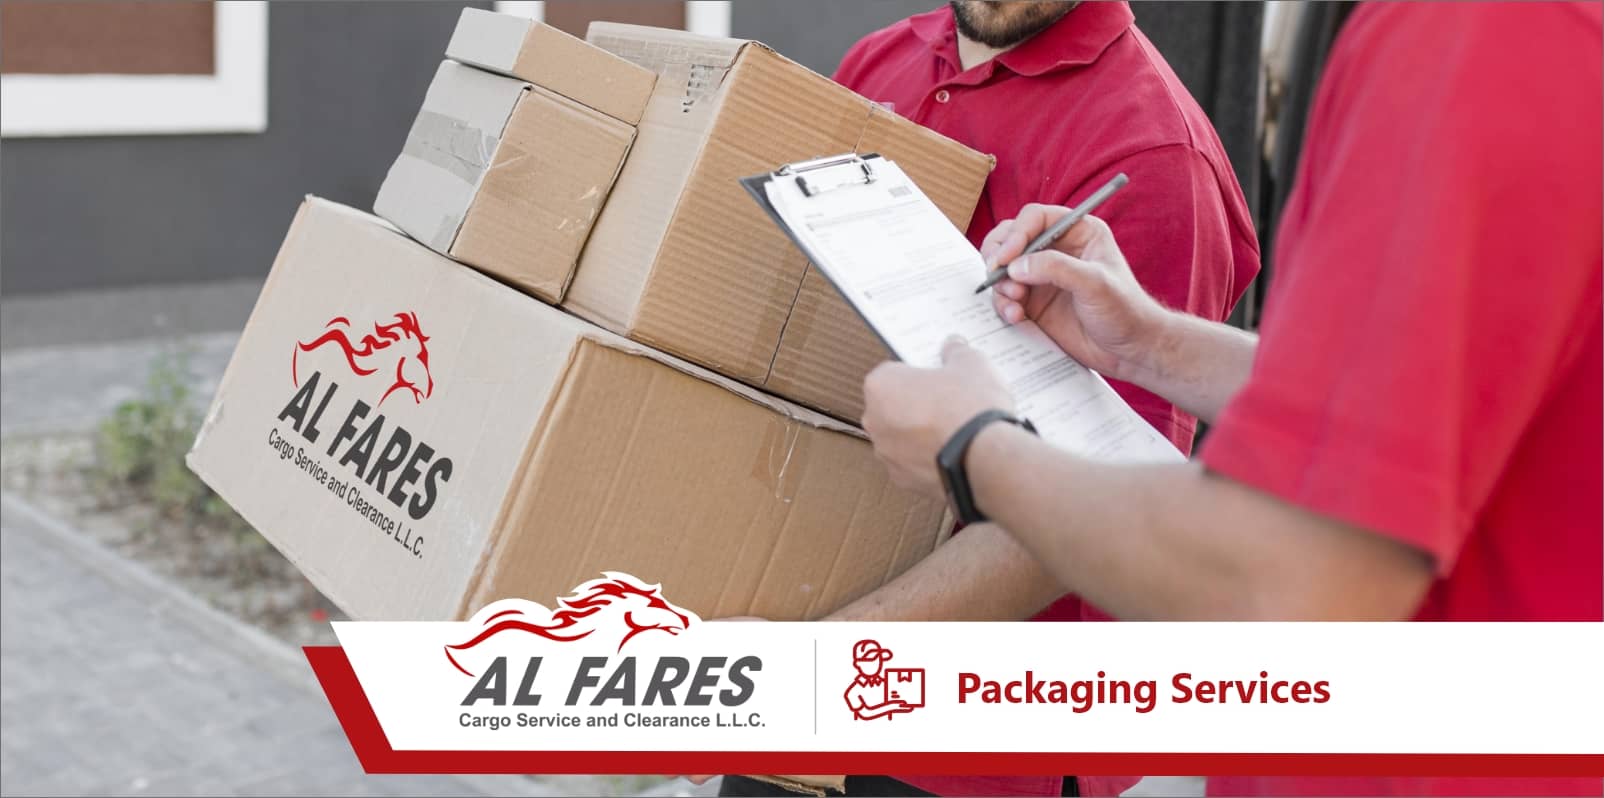 Packaging services